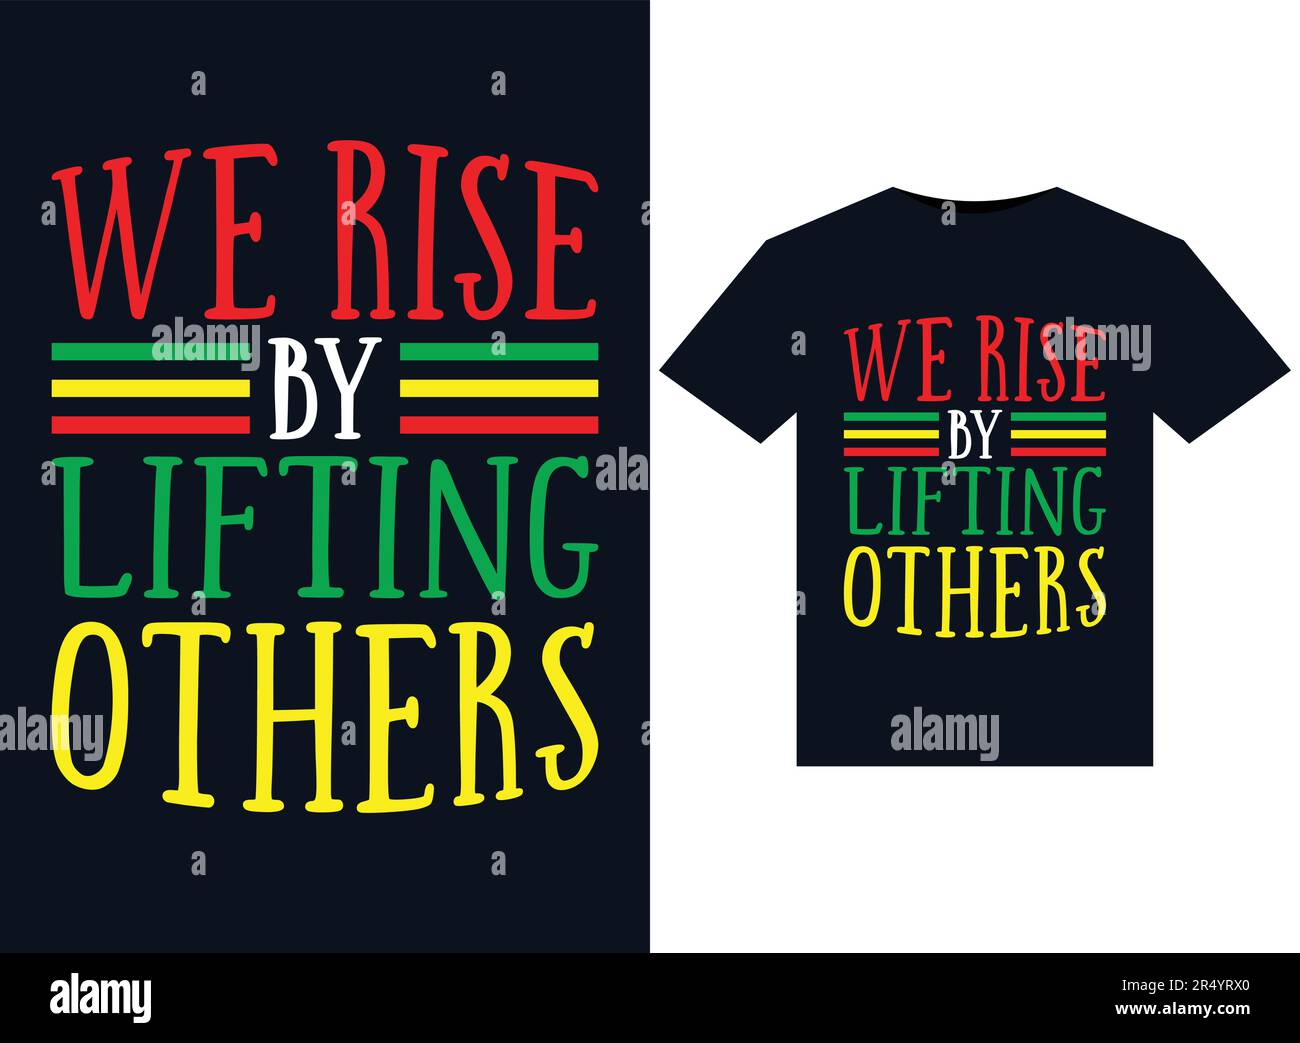 We Rise By Lifting Others illustrations for print-ready T-Shirts design Stock Vector